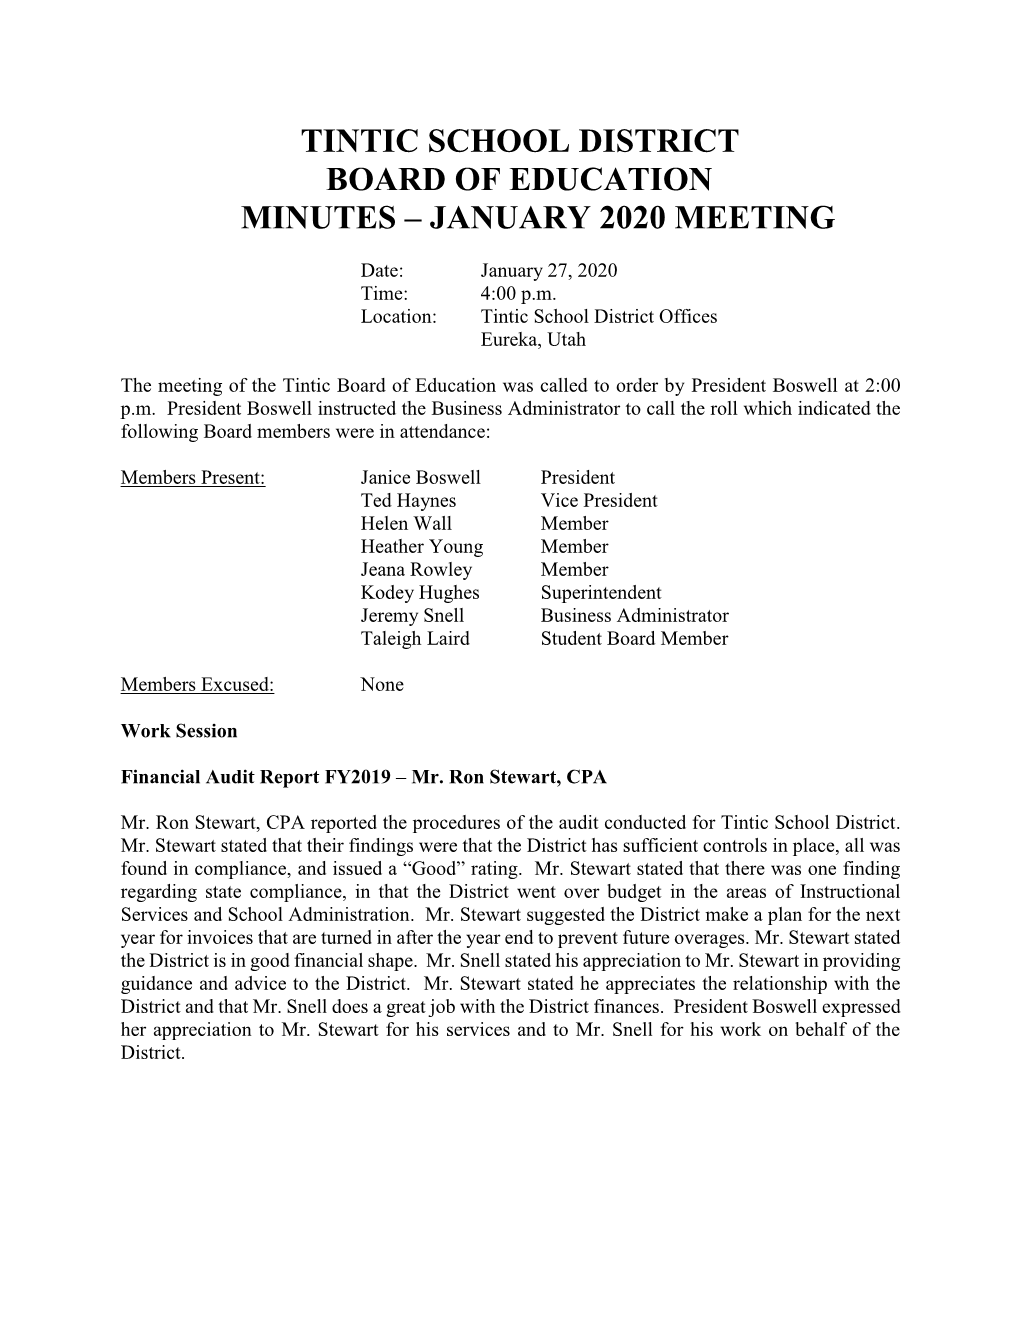 Tintic School District Board of Education Minutes – January 2020 Meeting